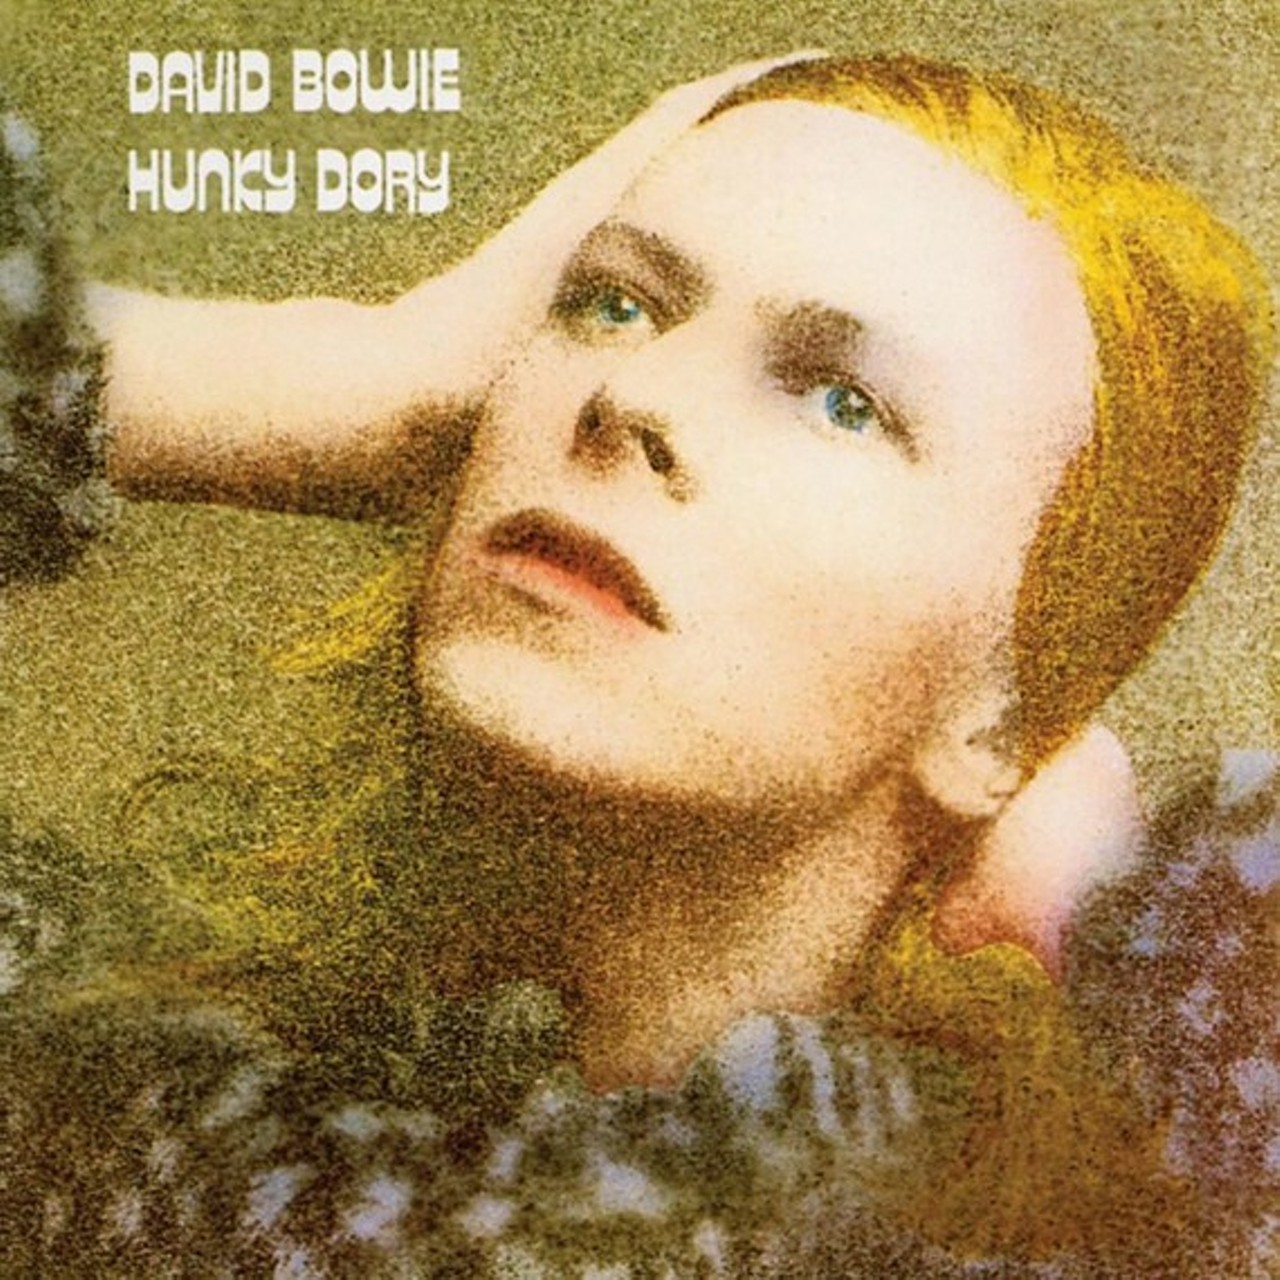 A Friday Night With(out) David Bowie 
Fri, Jan. 10
Album Cover Art